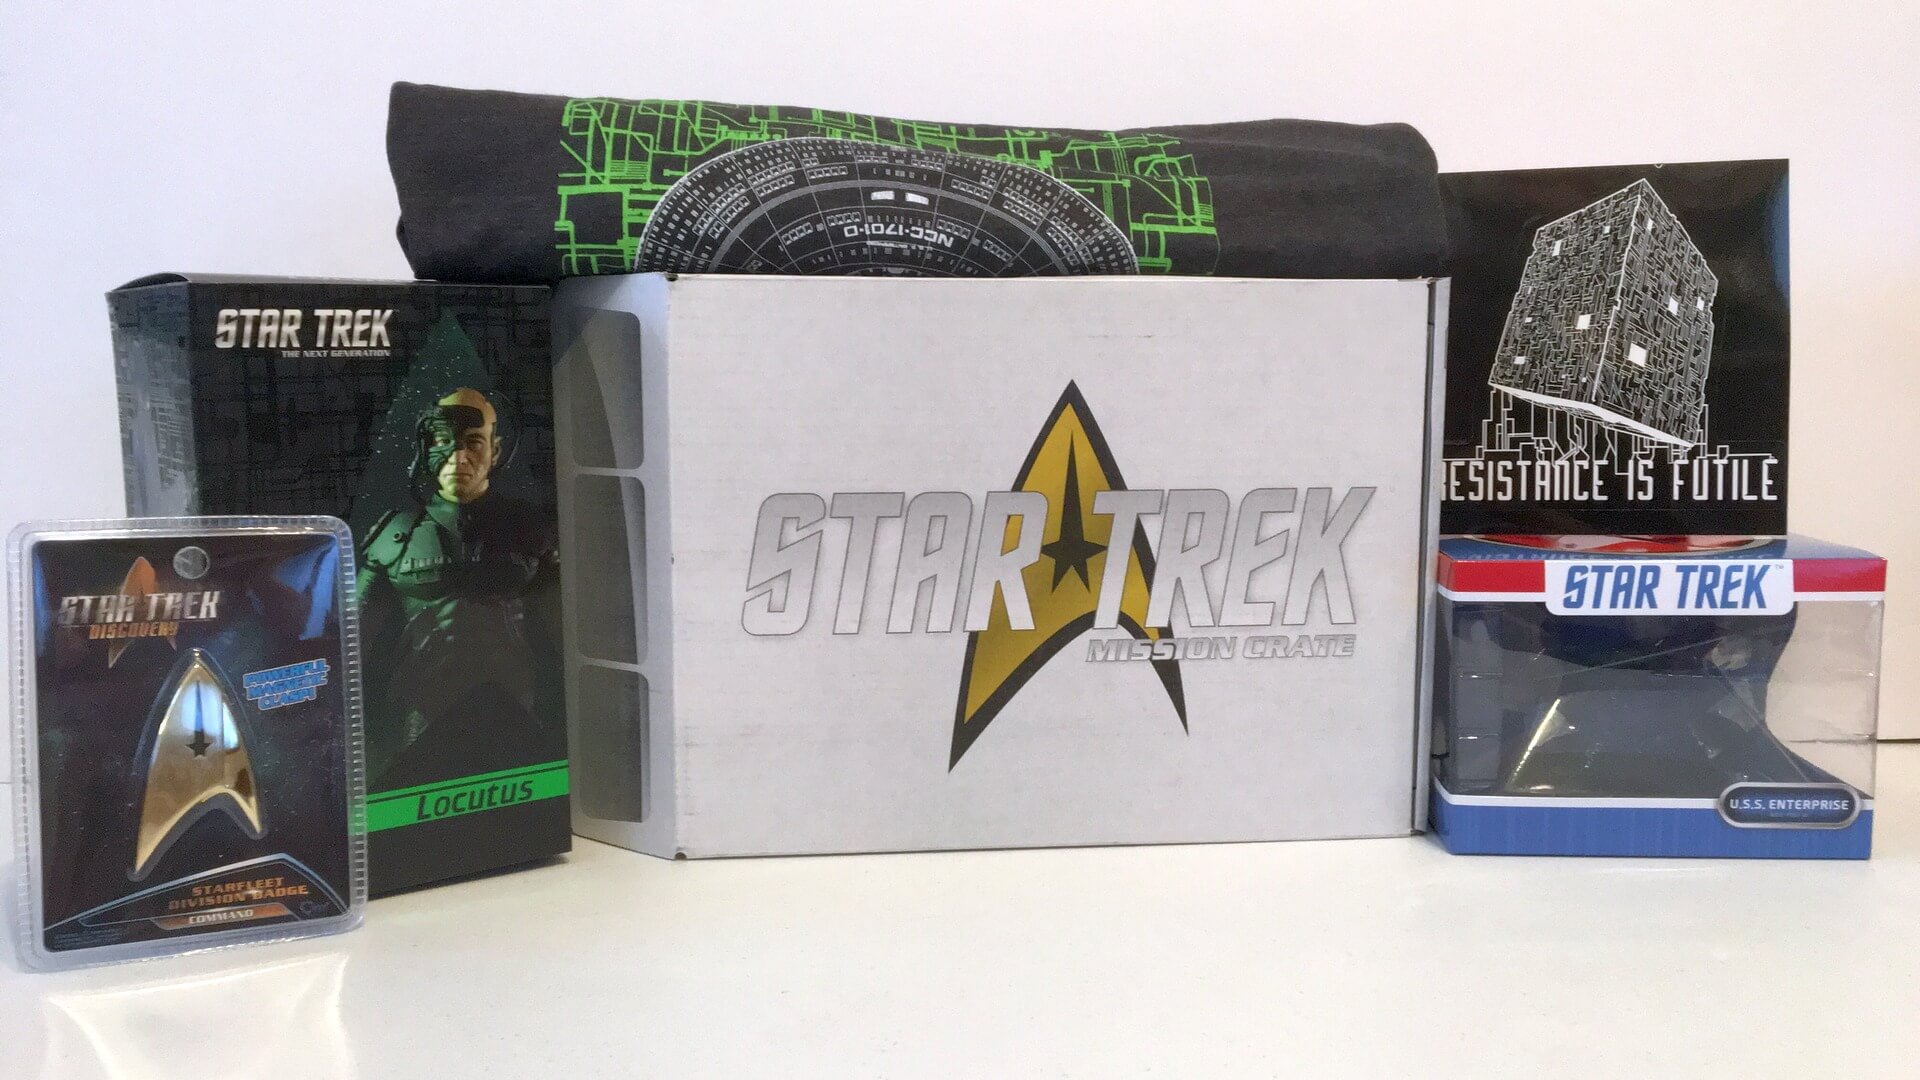 Star Trek Mission Crate- Mission 001: WOLF 359 - Review